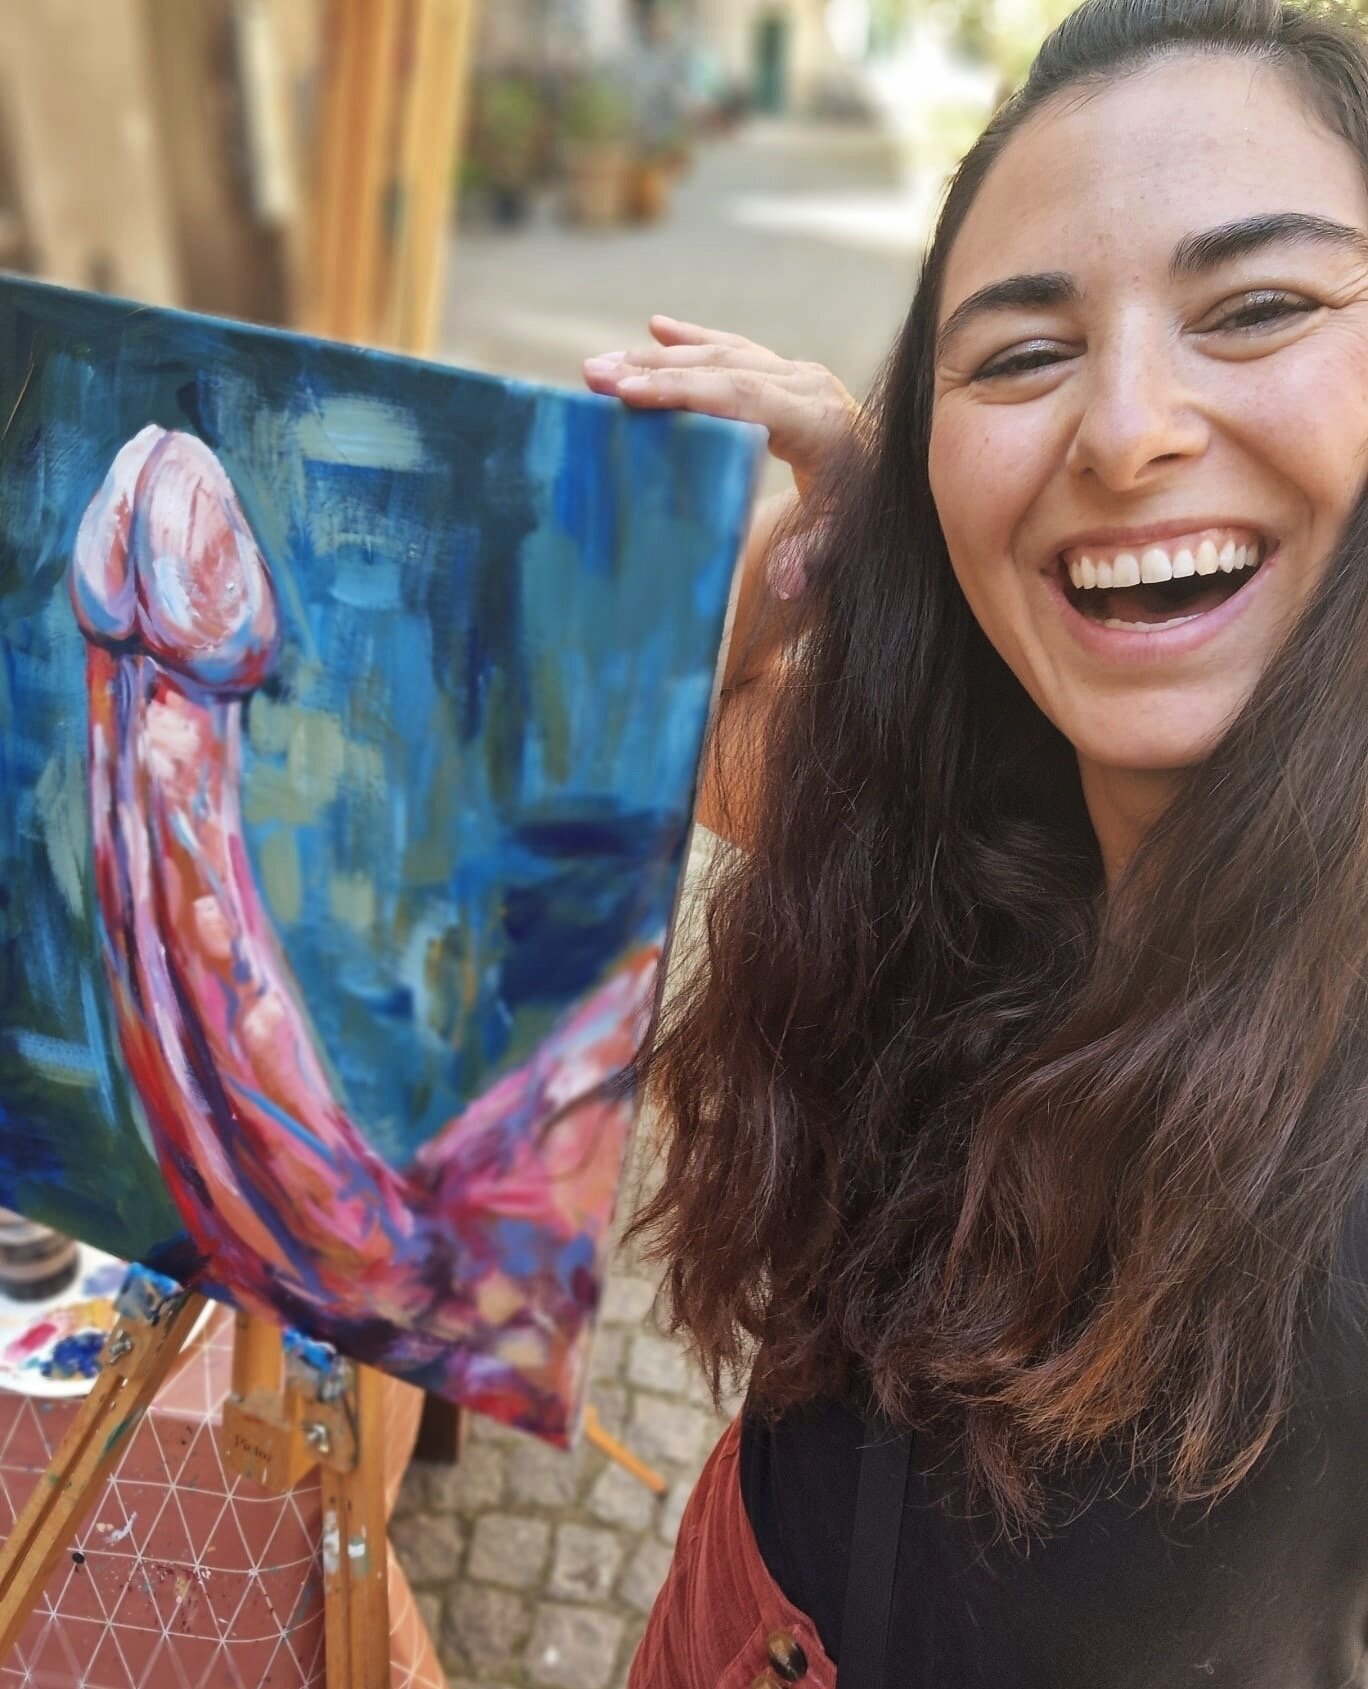 A Saturday full of bachelorette parties, dicks and laughter. It sure does not feel like work.⁠
⁠
#sipandcreatemalmo #paintingevent #artnight #sipandcreate #painting #sipandpaint #malmoart #artinmalmo #kickoff #teambuilding